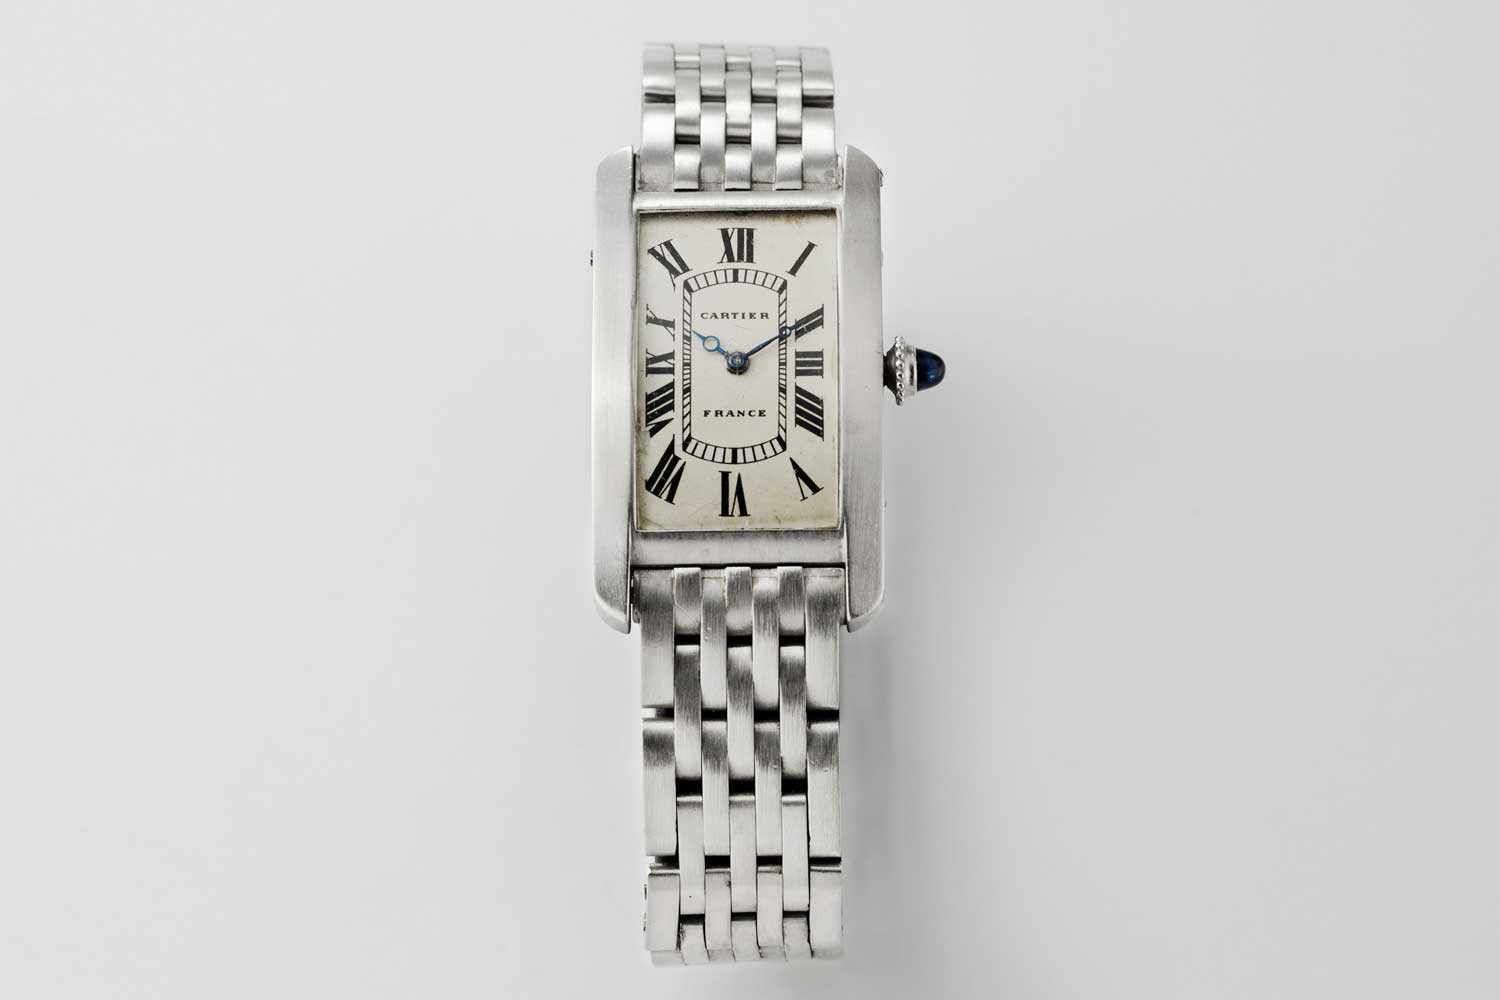 1930 Cartier Platinum Tank Cintrée made in France, medium size with original pt. 7-link bracelet; this particular example is from the private collection of Auro Montanari (©Revolution)